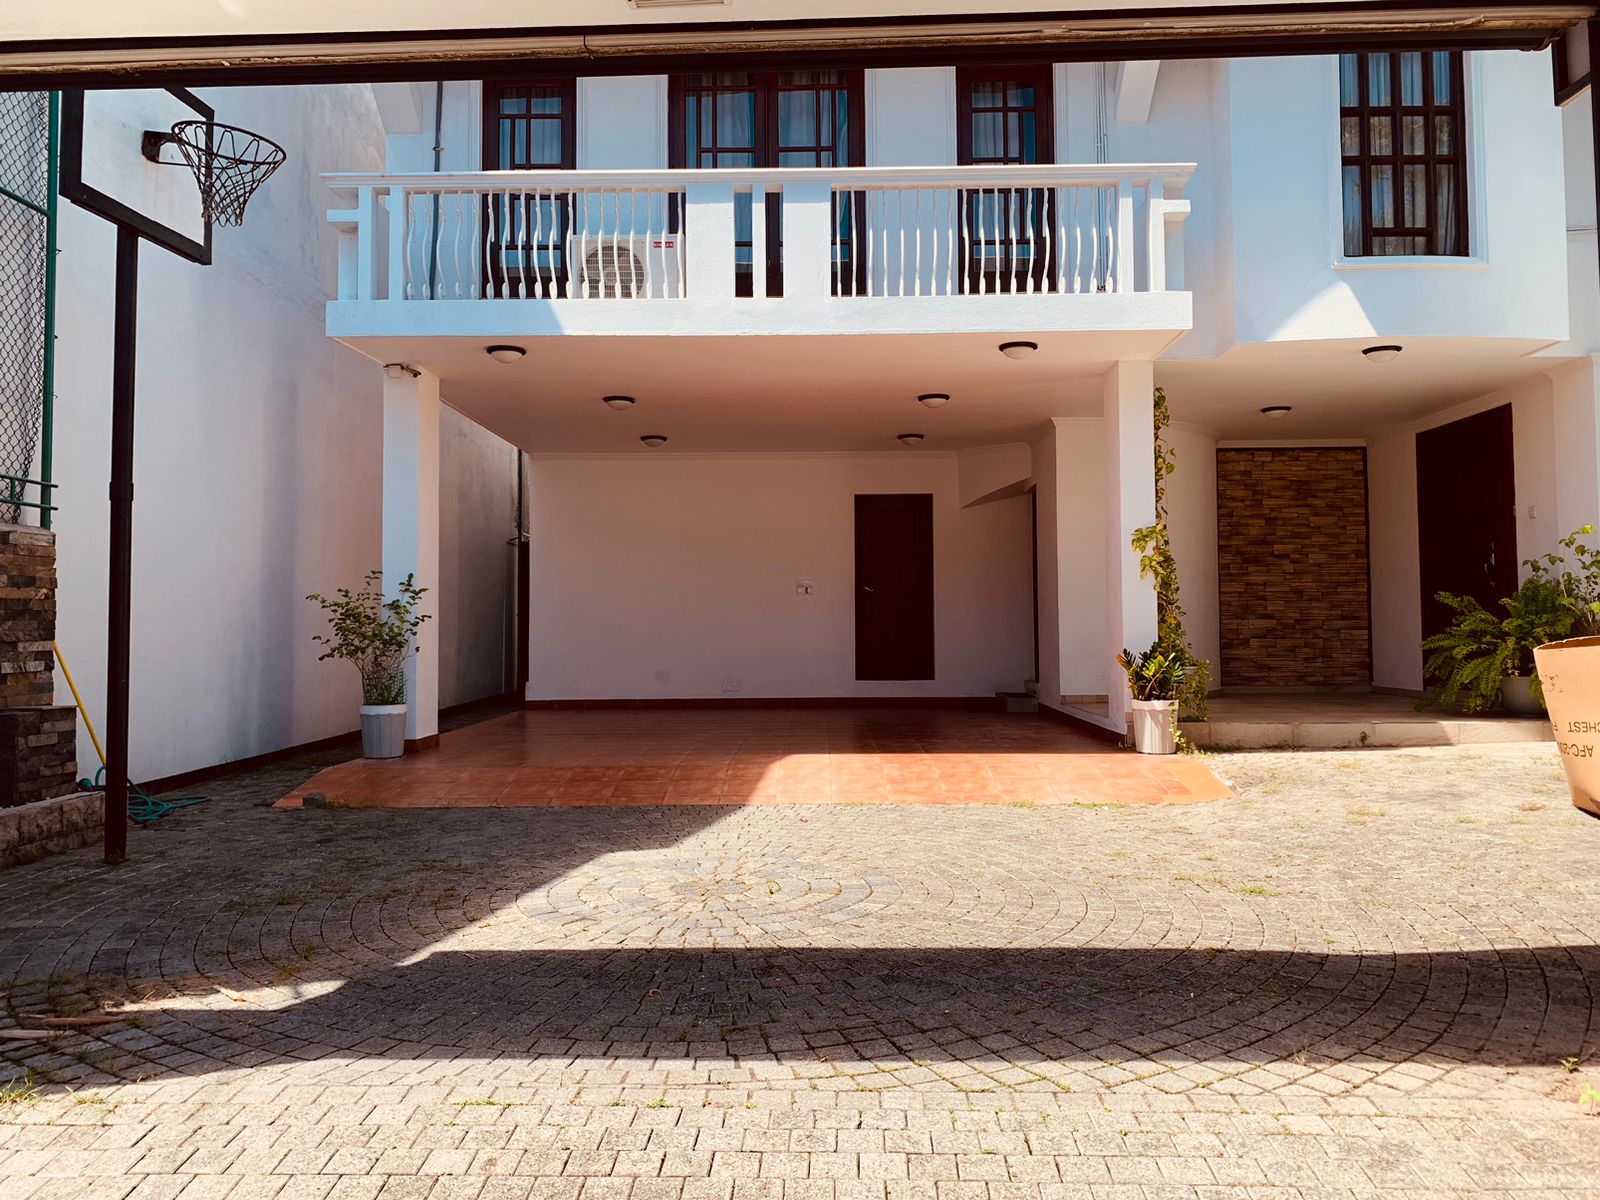 Luxury House For Rent In Park Road Colombo 05 - 5 Bedrooms - 1,500,000 per Month